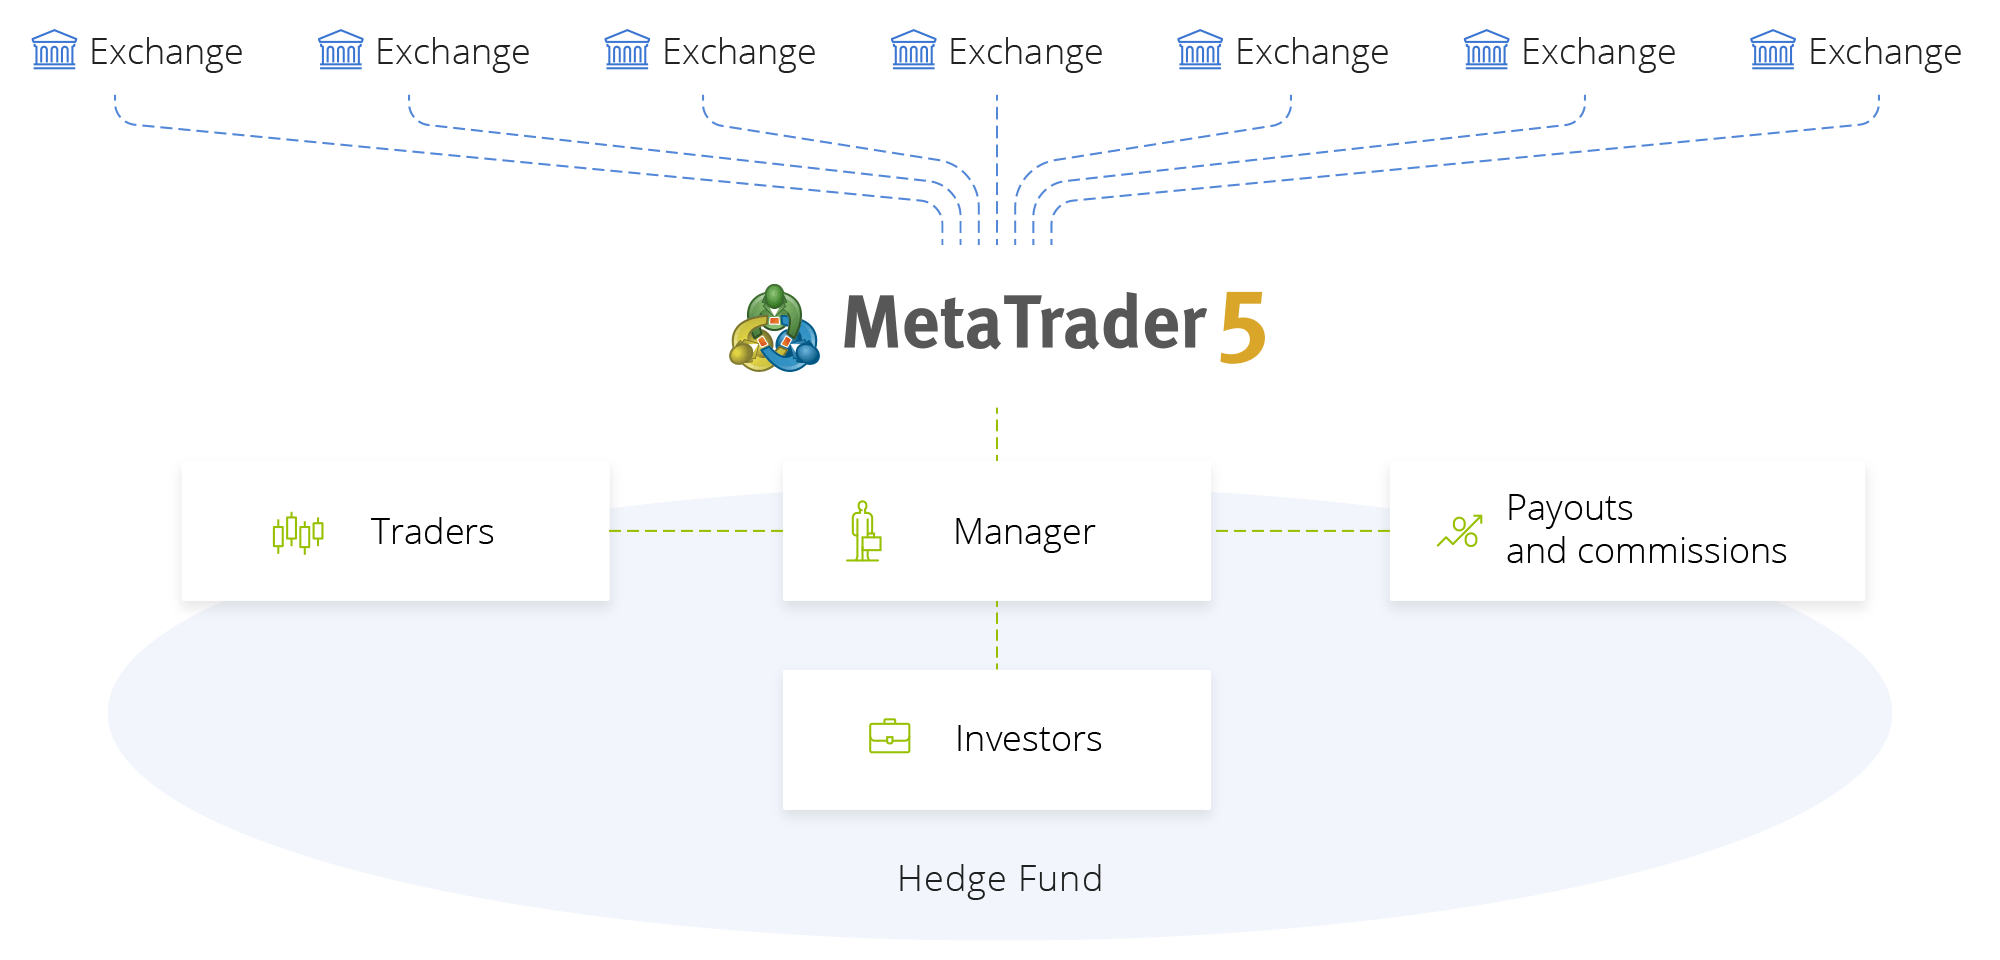 MetaTrader 5 is an exchange terminal with the integrated risk management and analytics